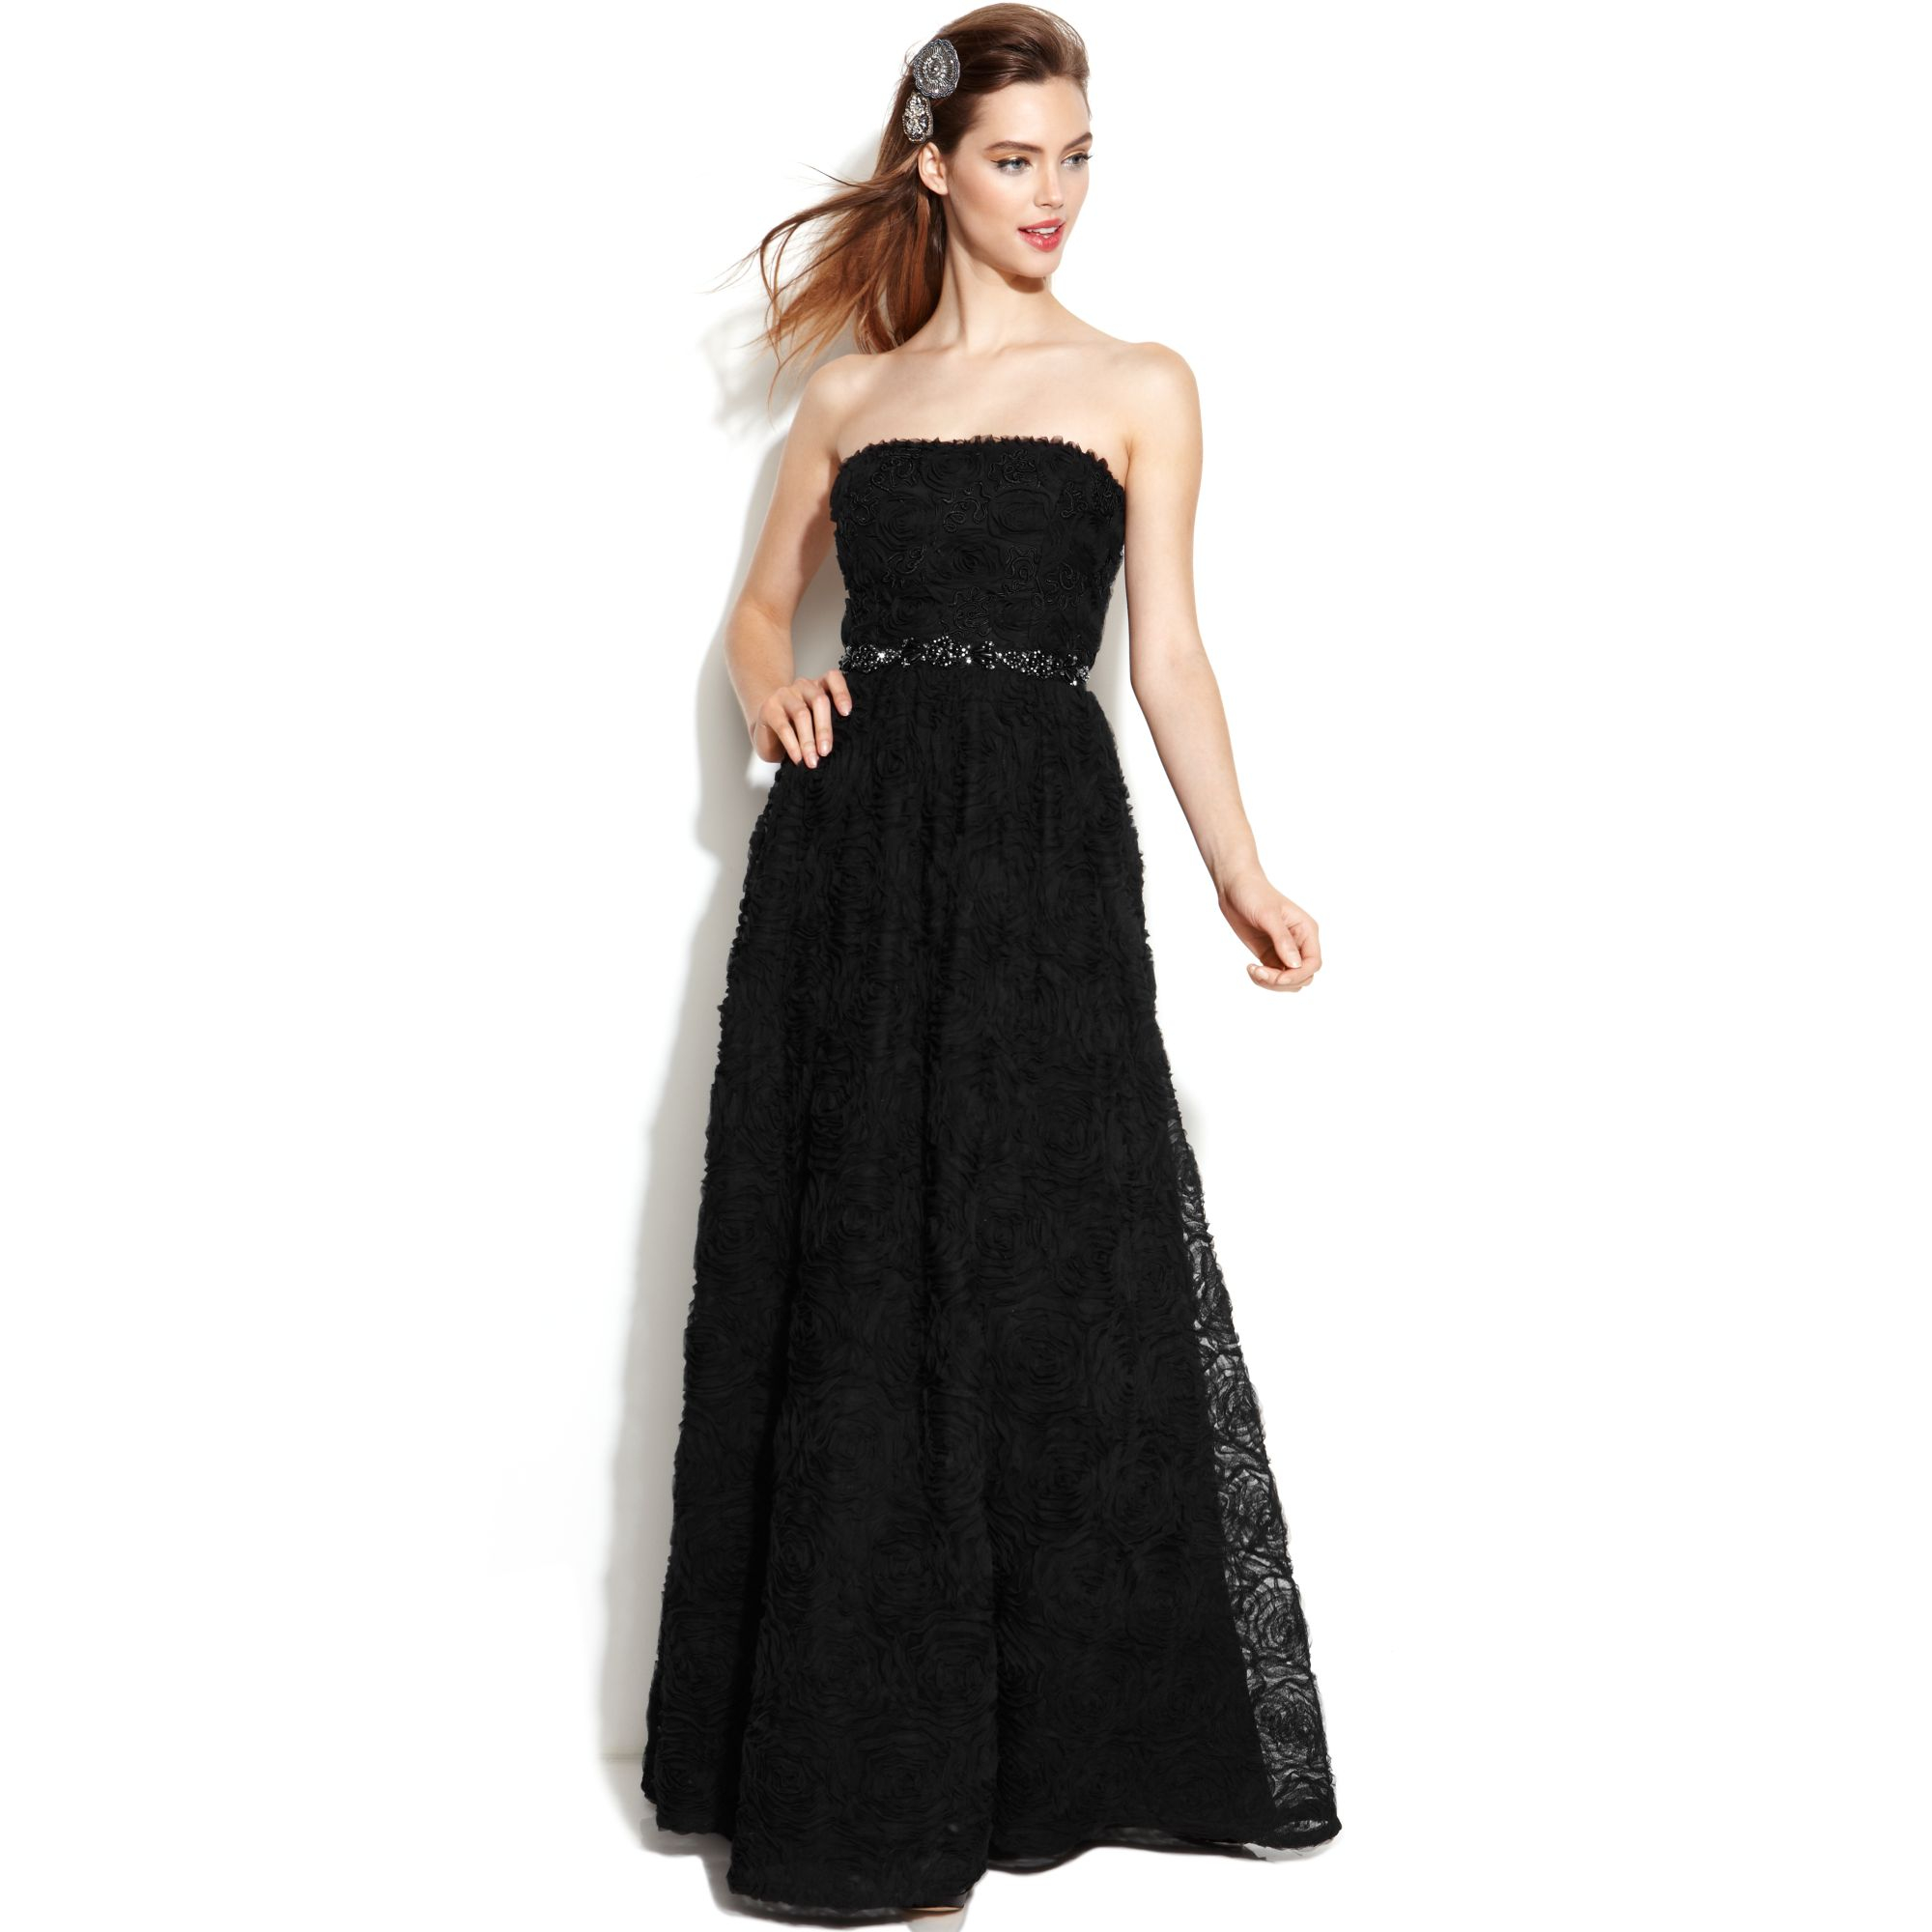 Adrianna Papell Strapless Beaded Ball Gown in Black - Lyst